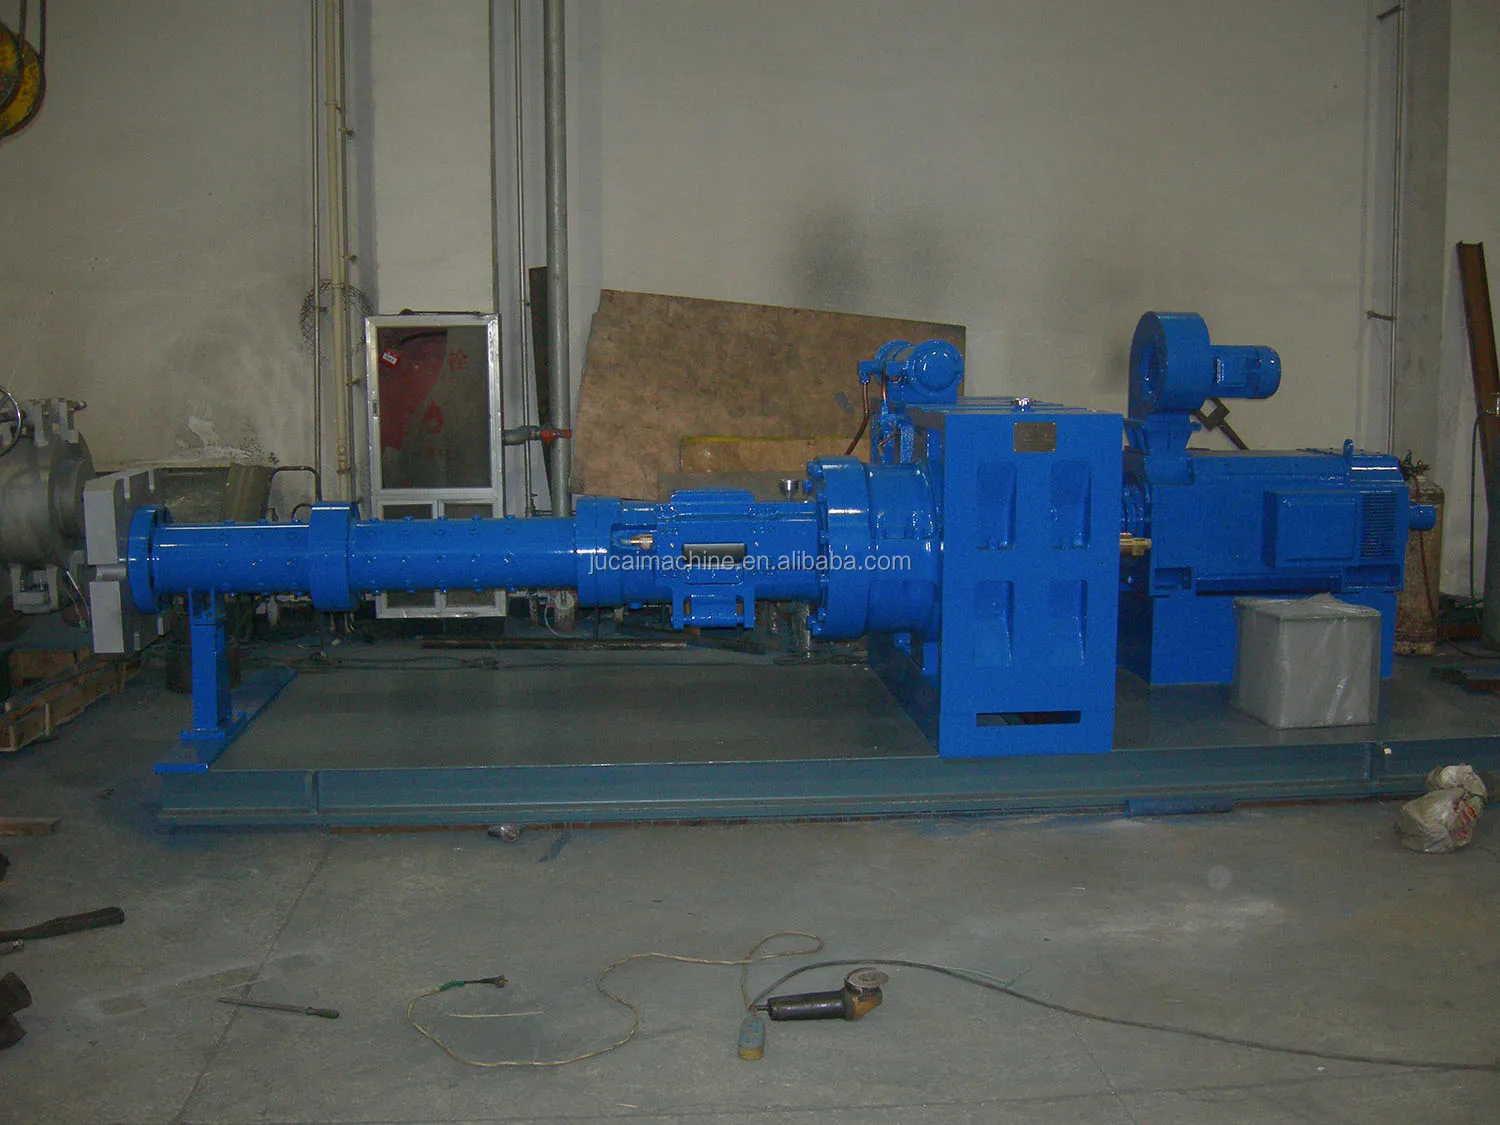 
Cold Feed Rubber Extruder/extruder machine for rubber 